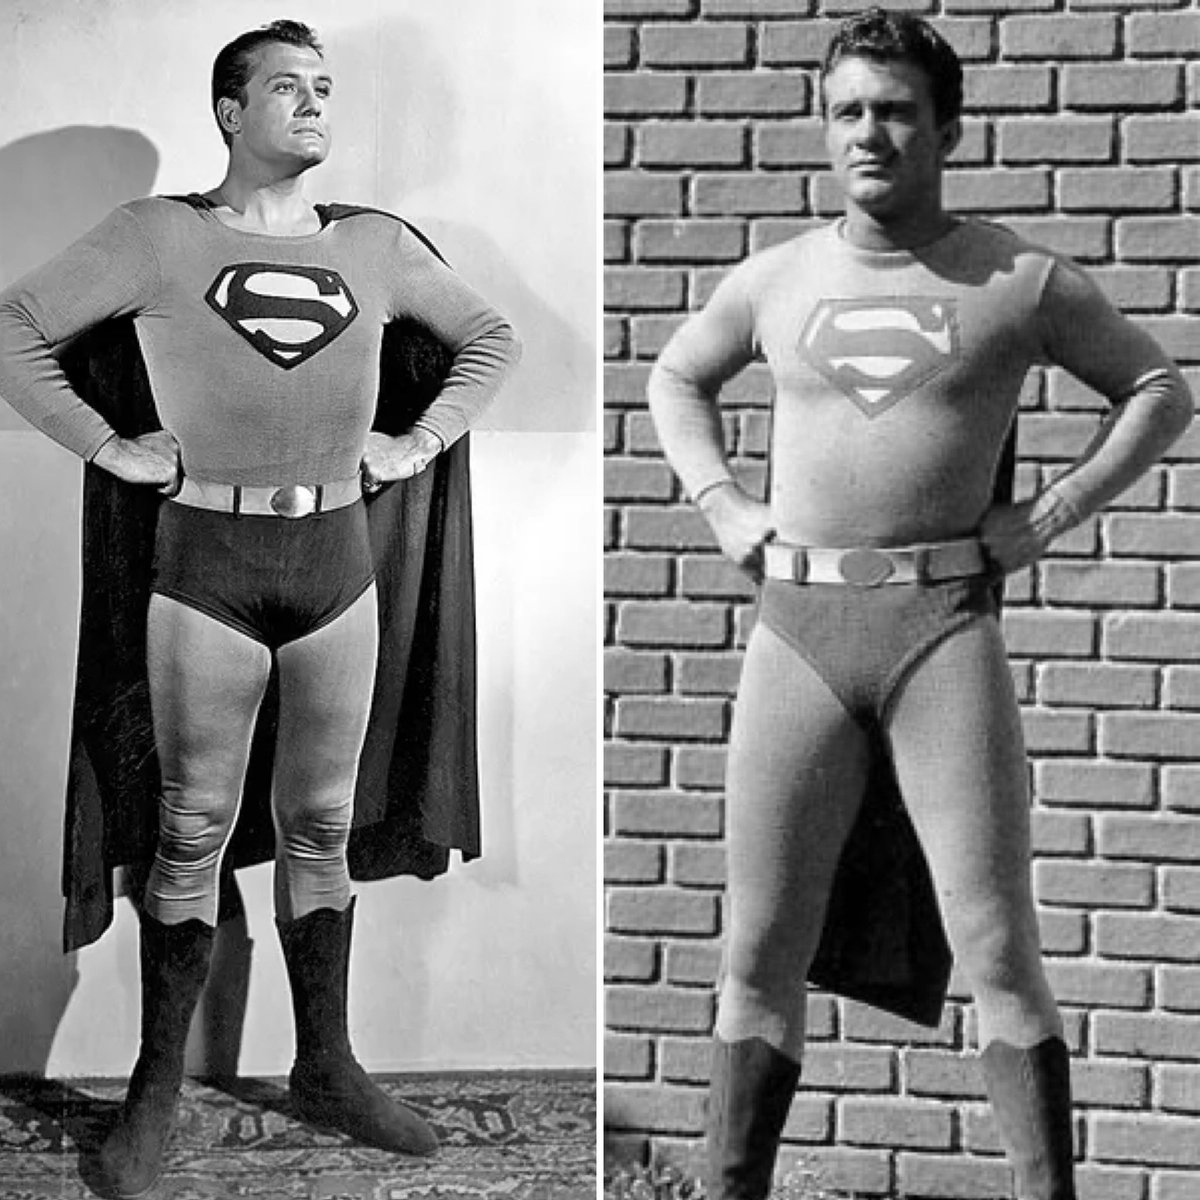 Even if THE ADVENTURES OF SUPERBOY couldn’t have *technically* been a prequel to the #GeorgeReeves #Superman series (w/o retconning “Superman on Earth,” at least), the Superboy ’61 pilot definitely felt like the two shows would have been spiritual companions. Alas!